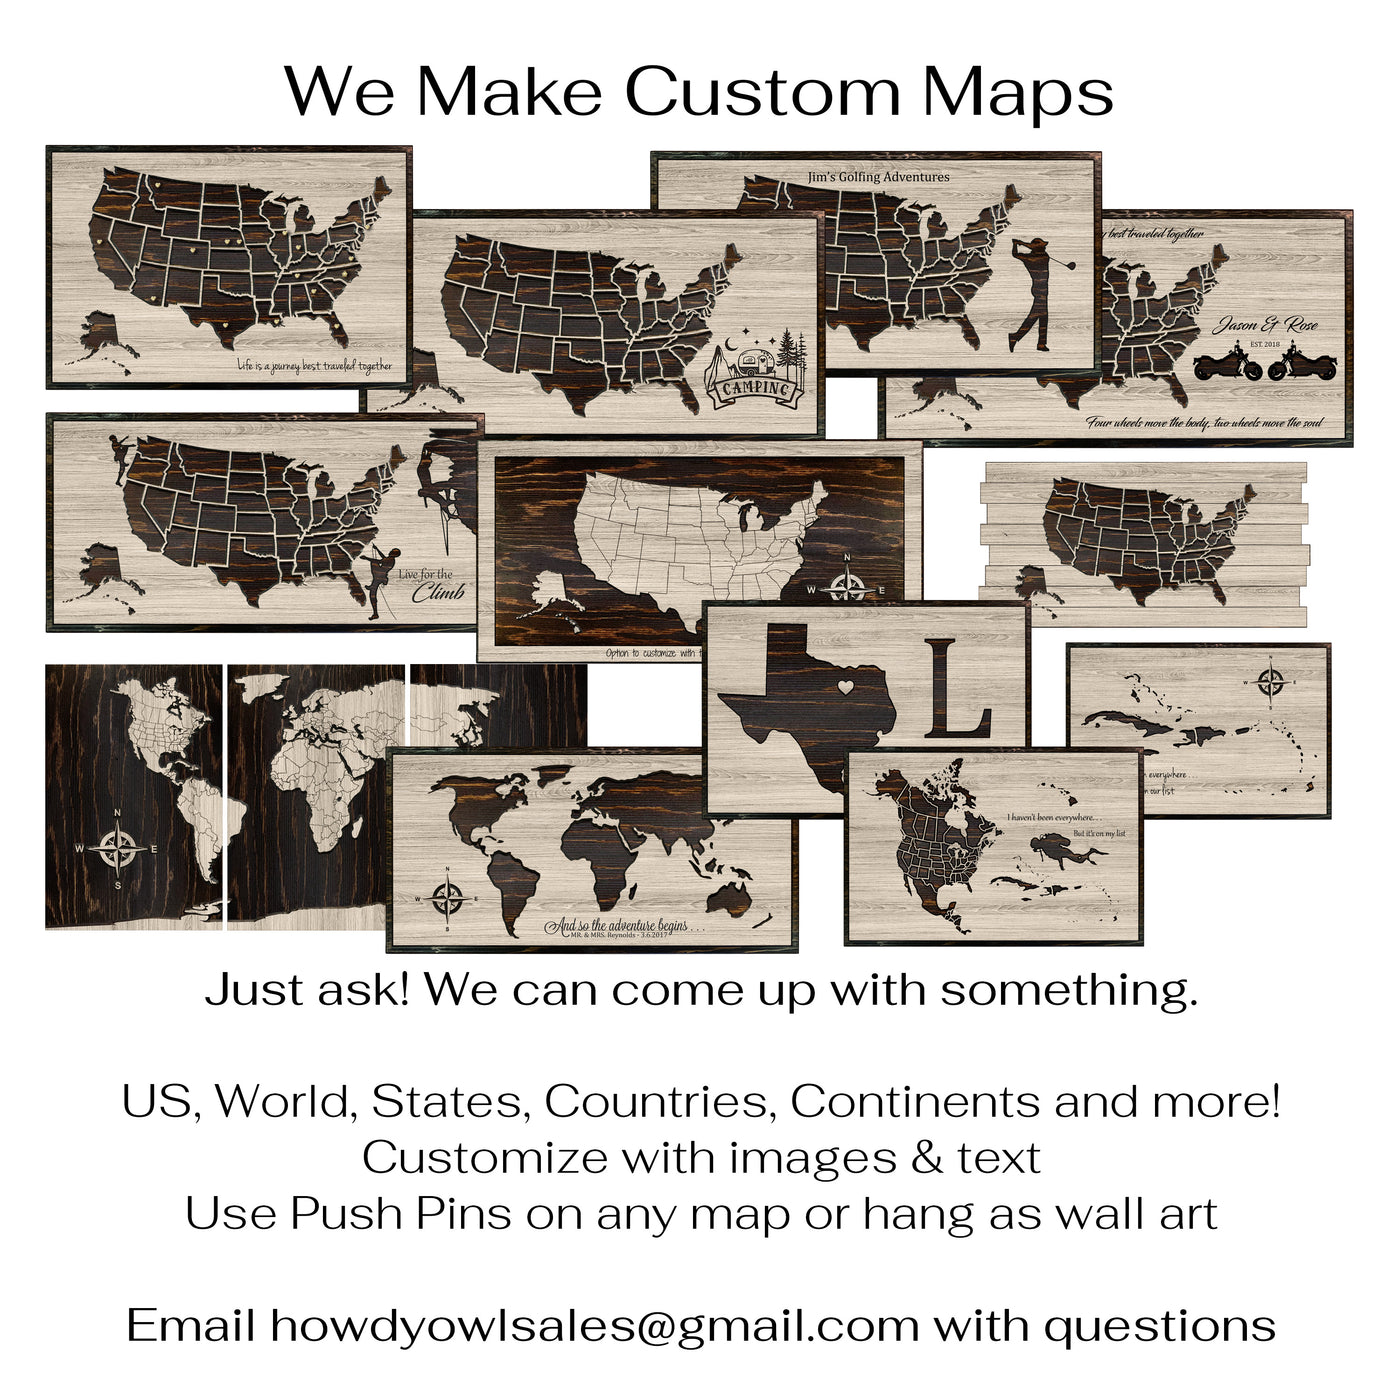 Custom US push pin travel map carved into wood and personalized with your own text - Anniversary gift idea - Use push pins to mark your travels